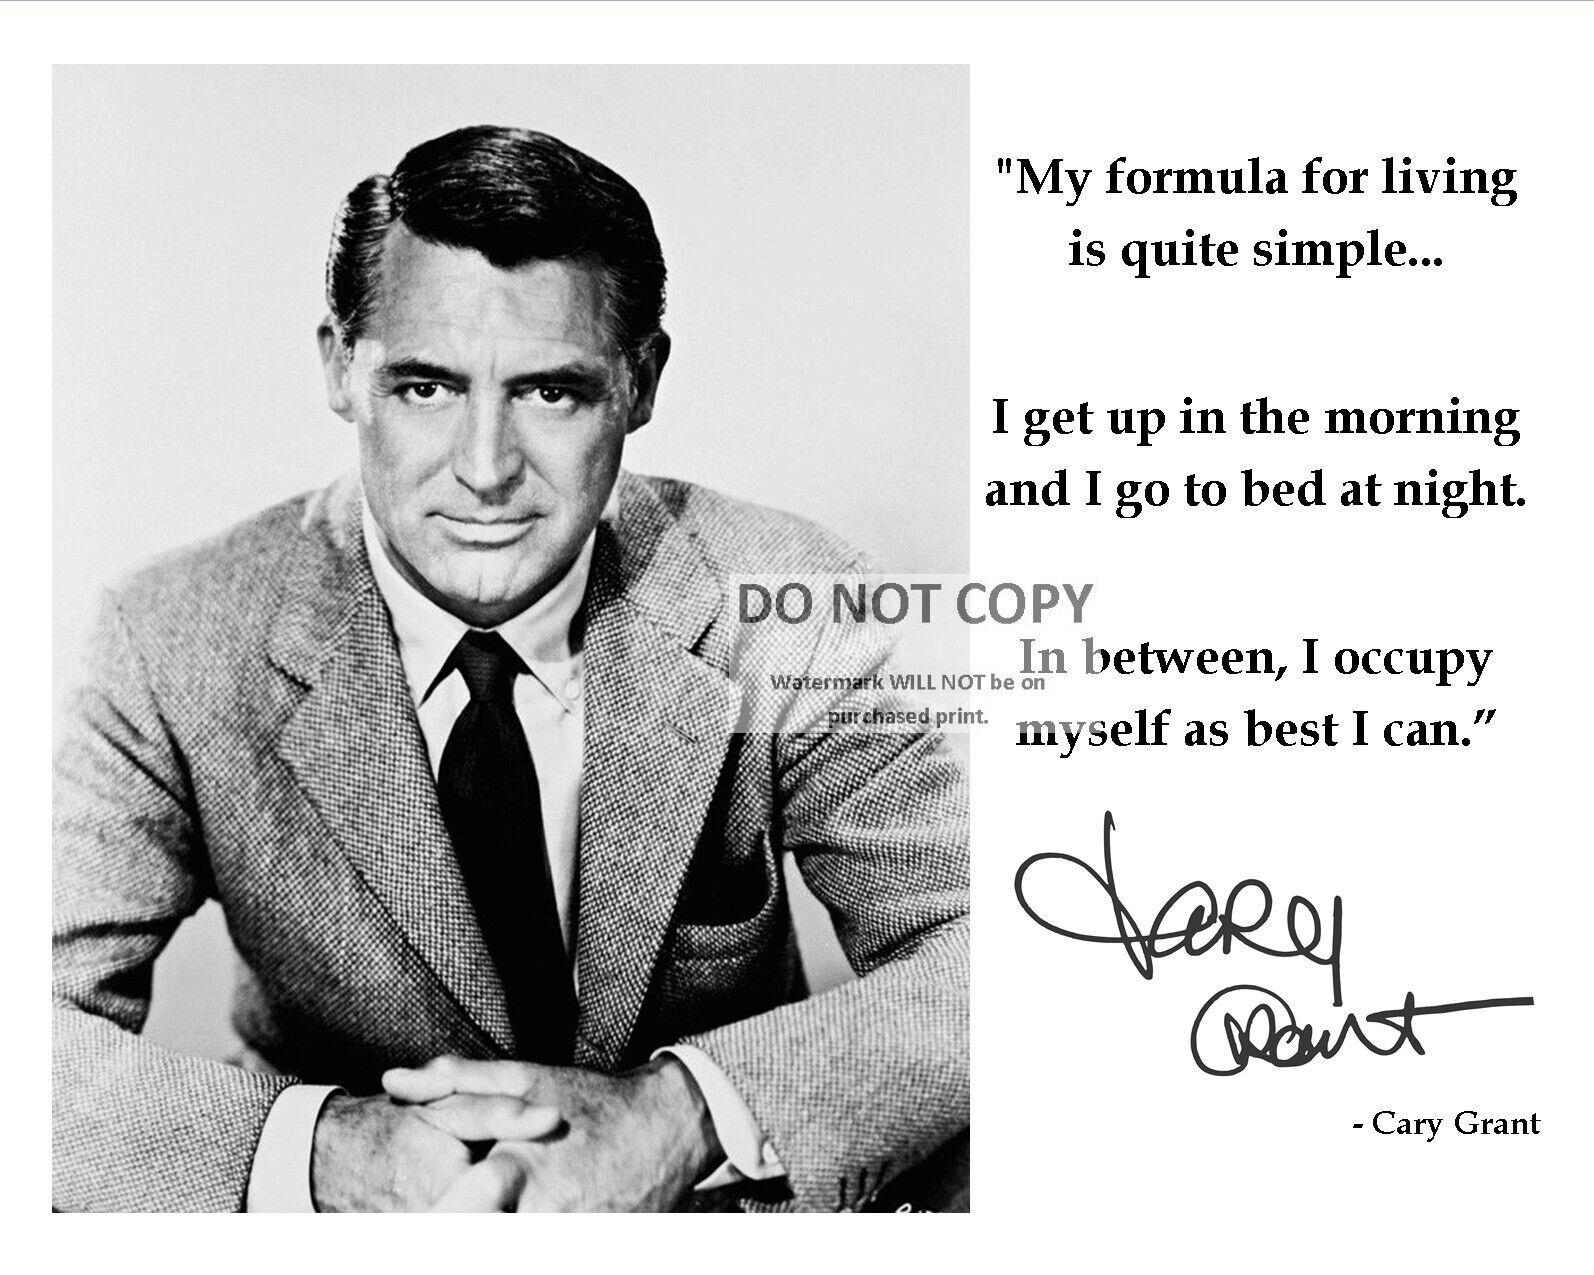 CARY GRANT PHOTO WITH FORMULA FOR LIVING QUOTE & *SIGNATURE - 8X10 PHOTO (PQ082)